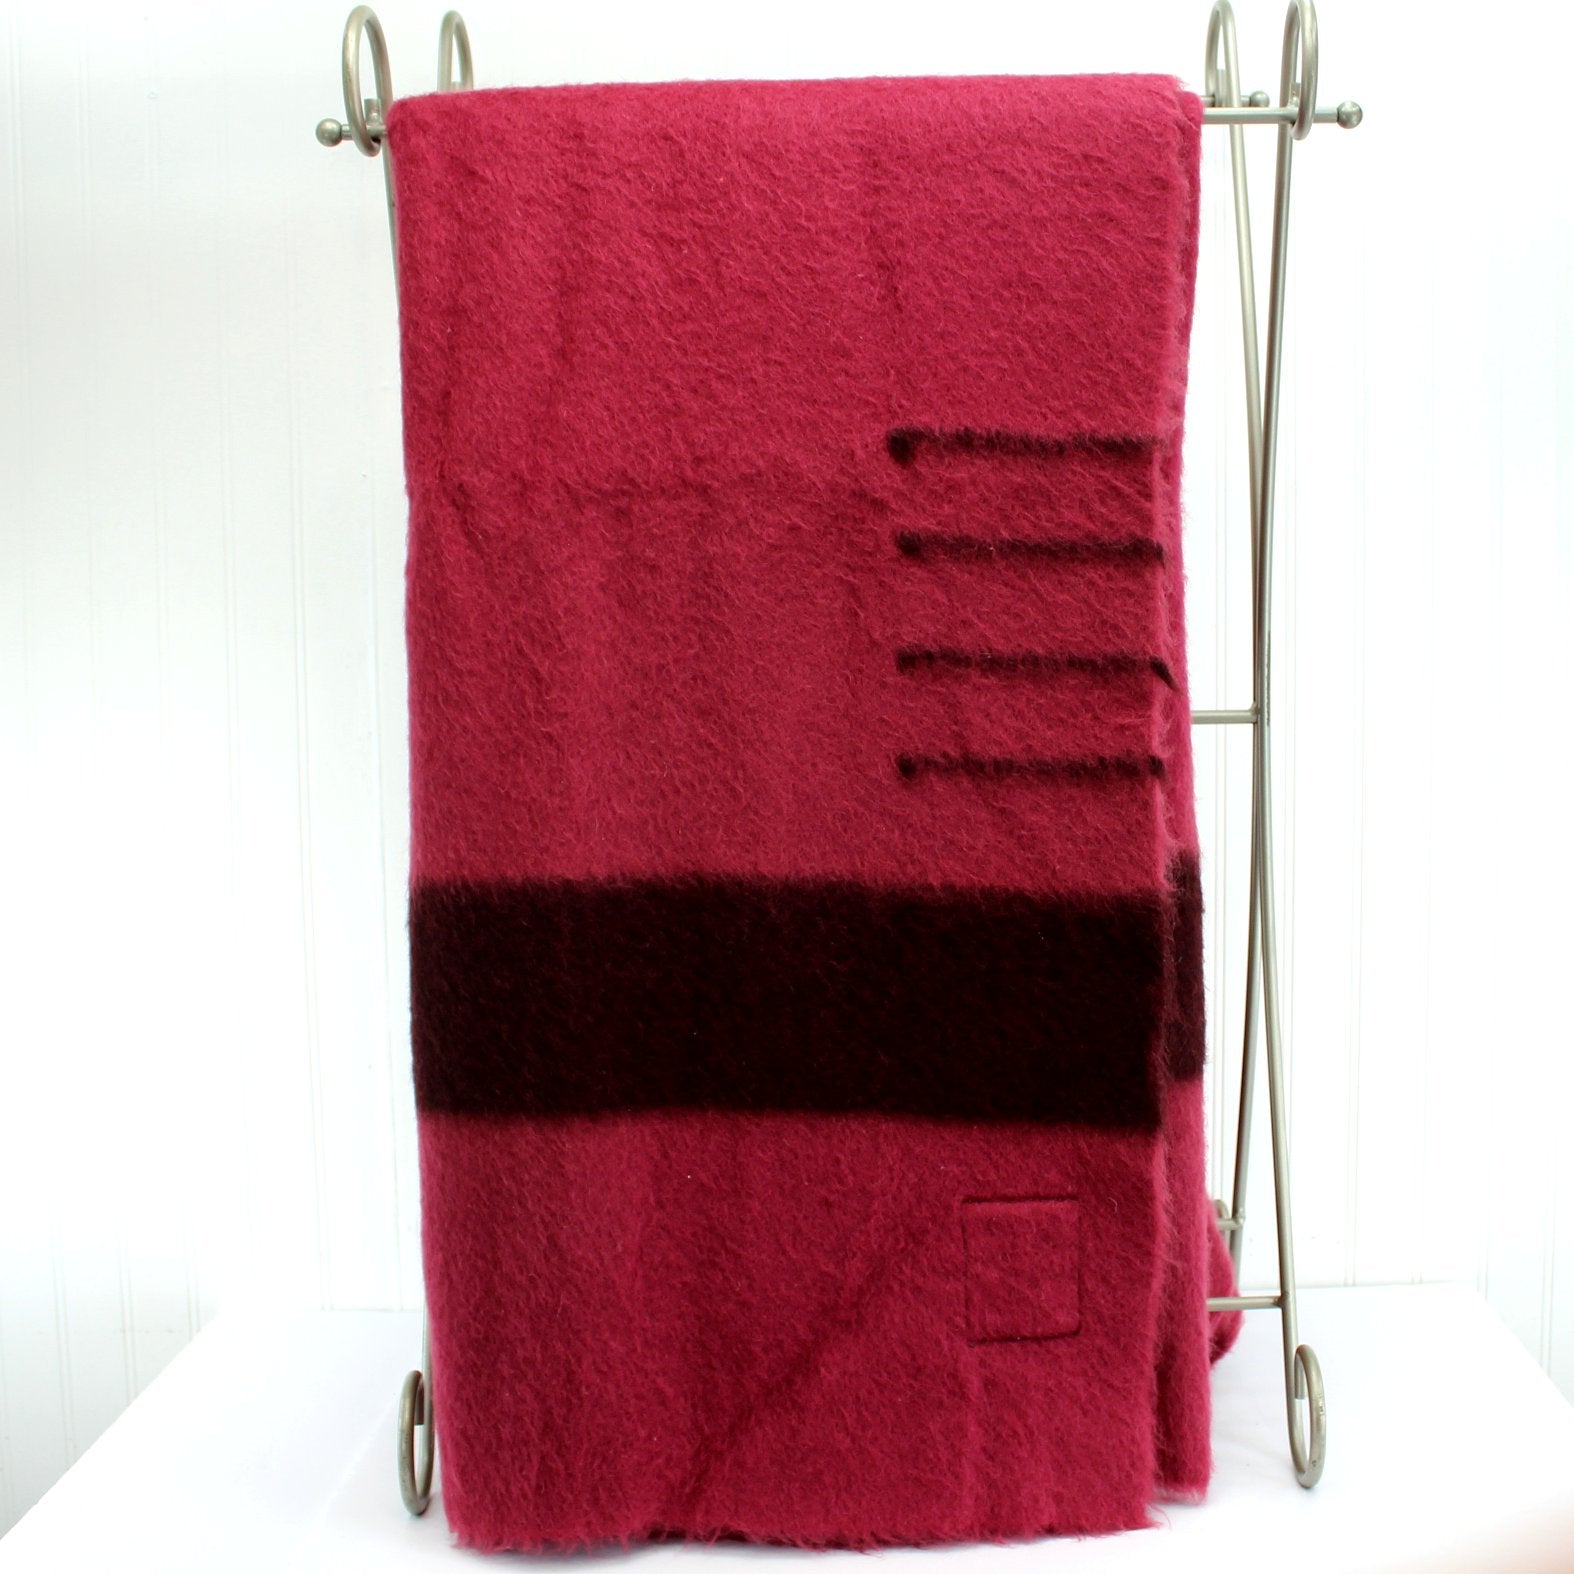 Rare Hudson Bay Wool Blanket 4 Point Cranberry  69" X 91" Weight 6# Excellent vertical view 4 points band black